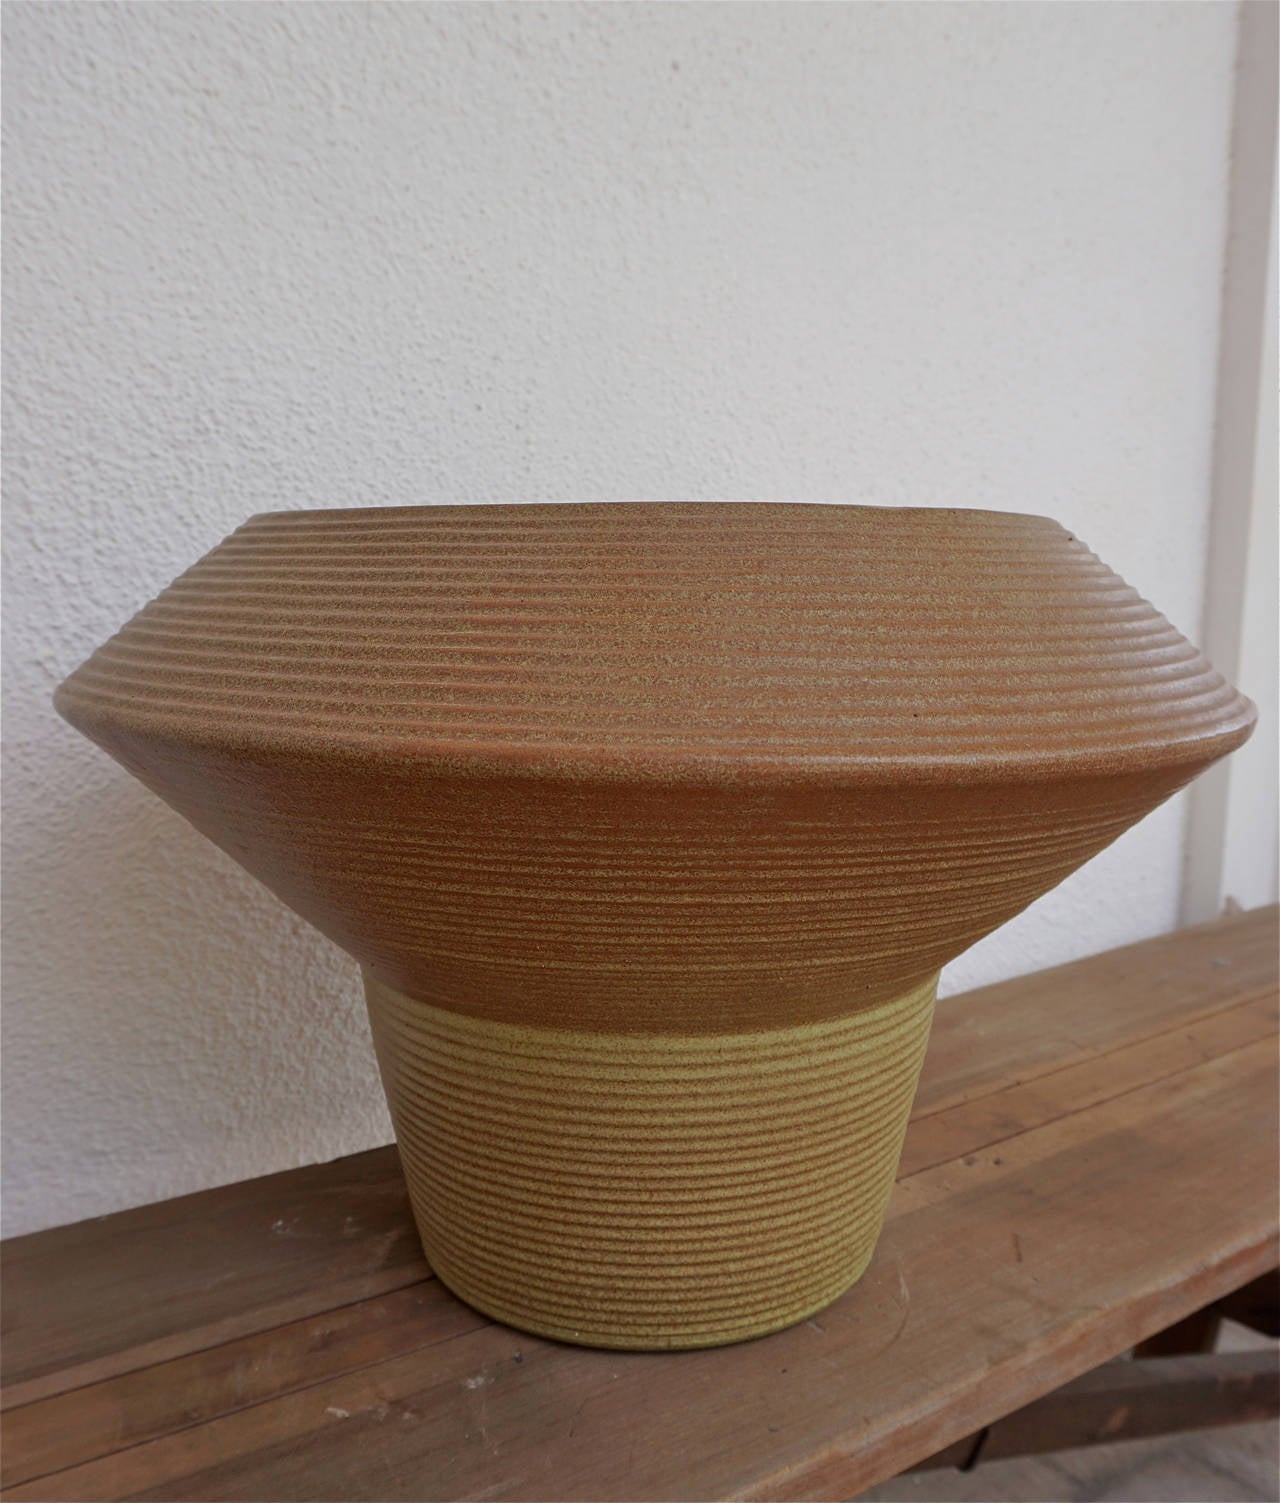 Striking example of Mid-Century pottery, ribbed and two-toned in earthy colors.